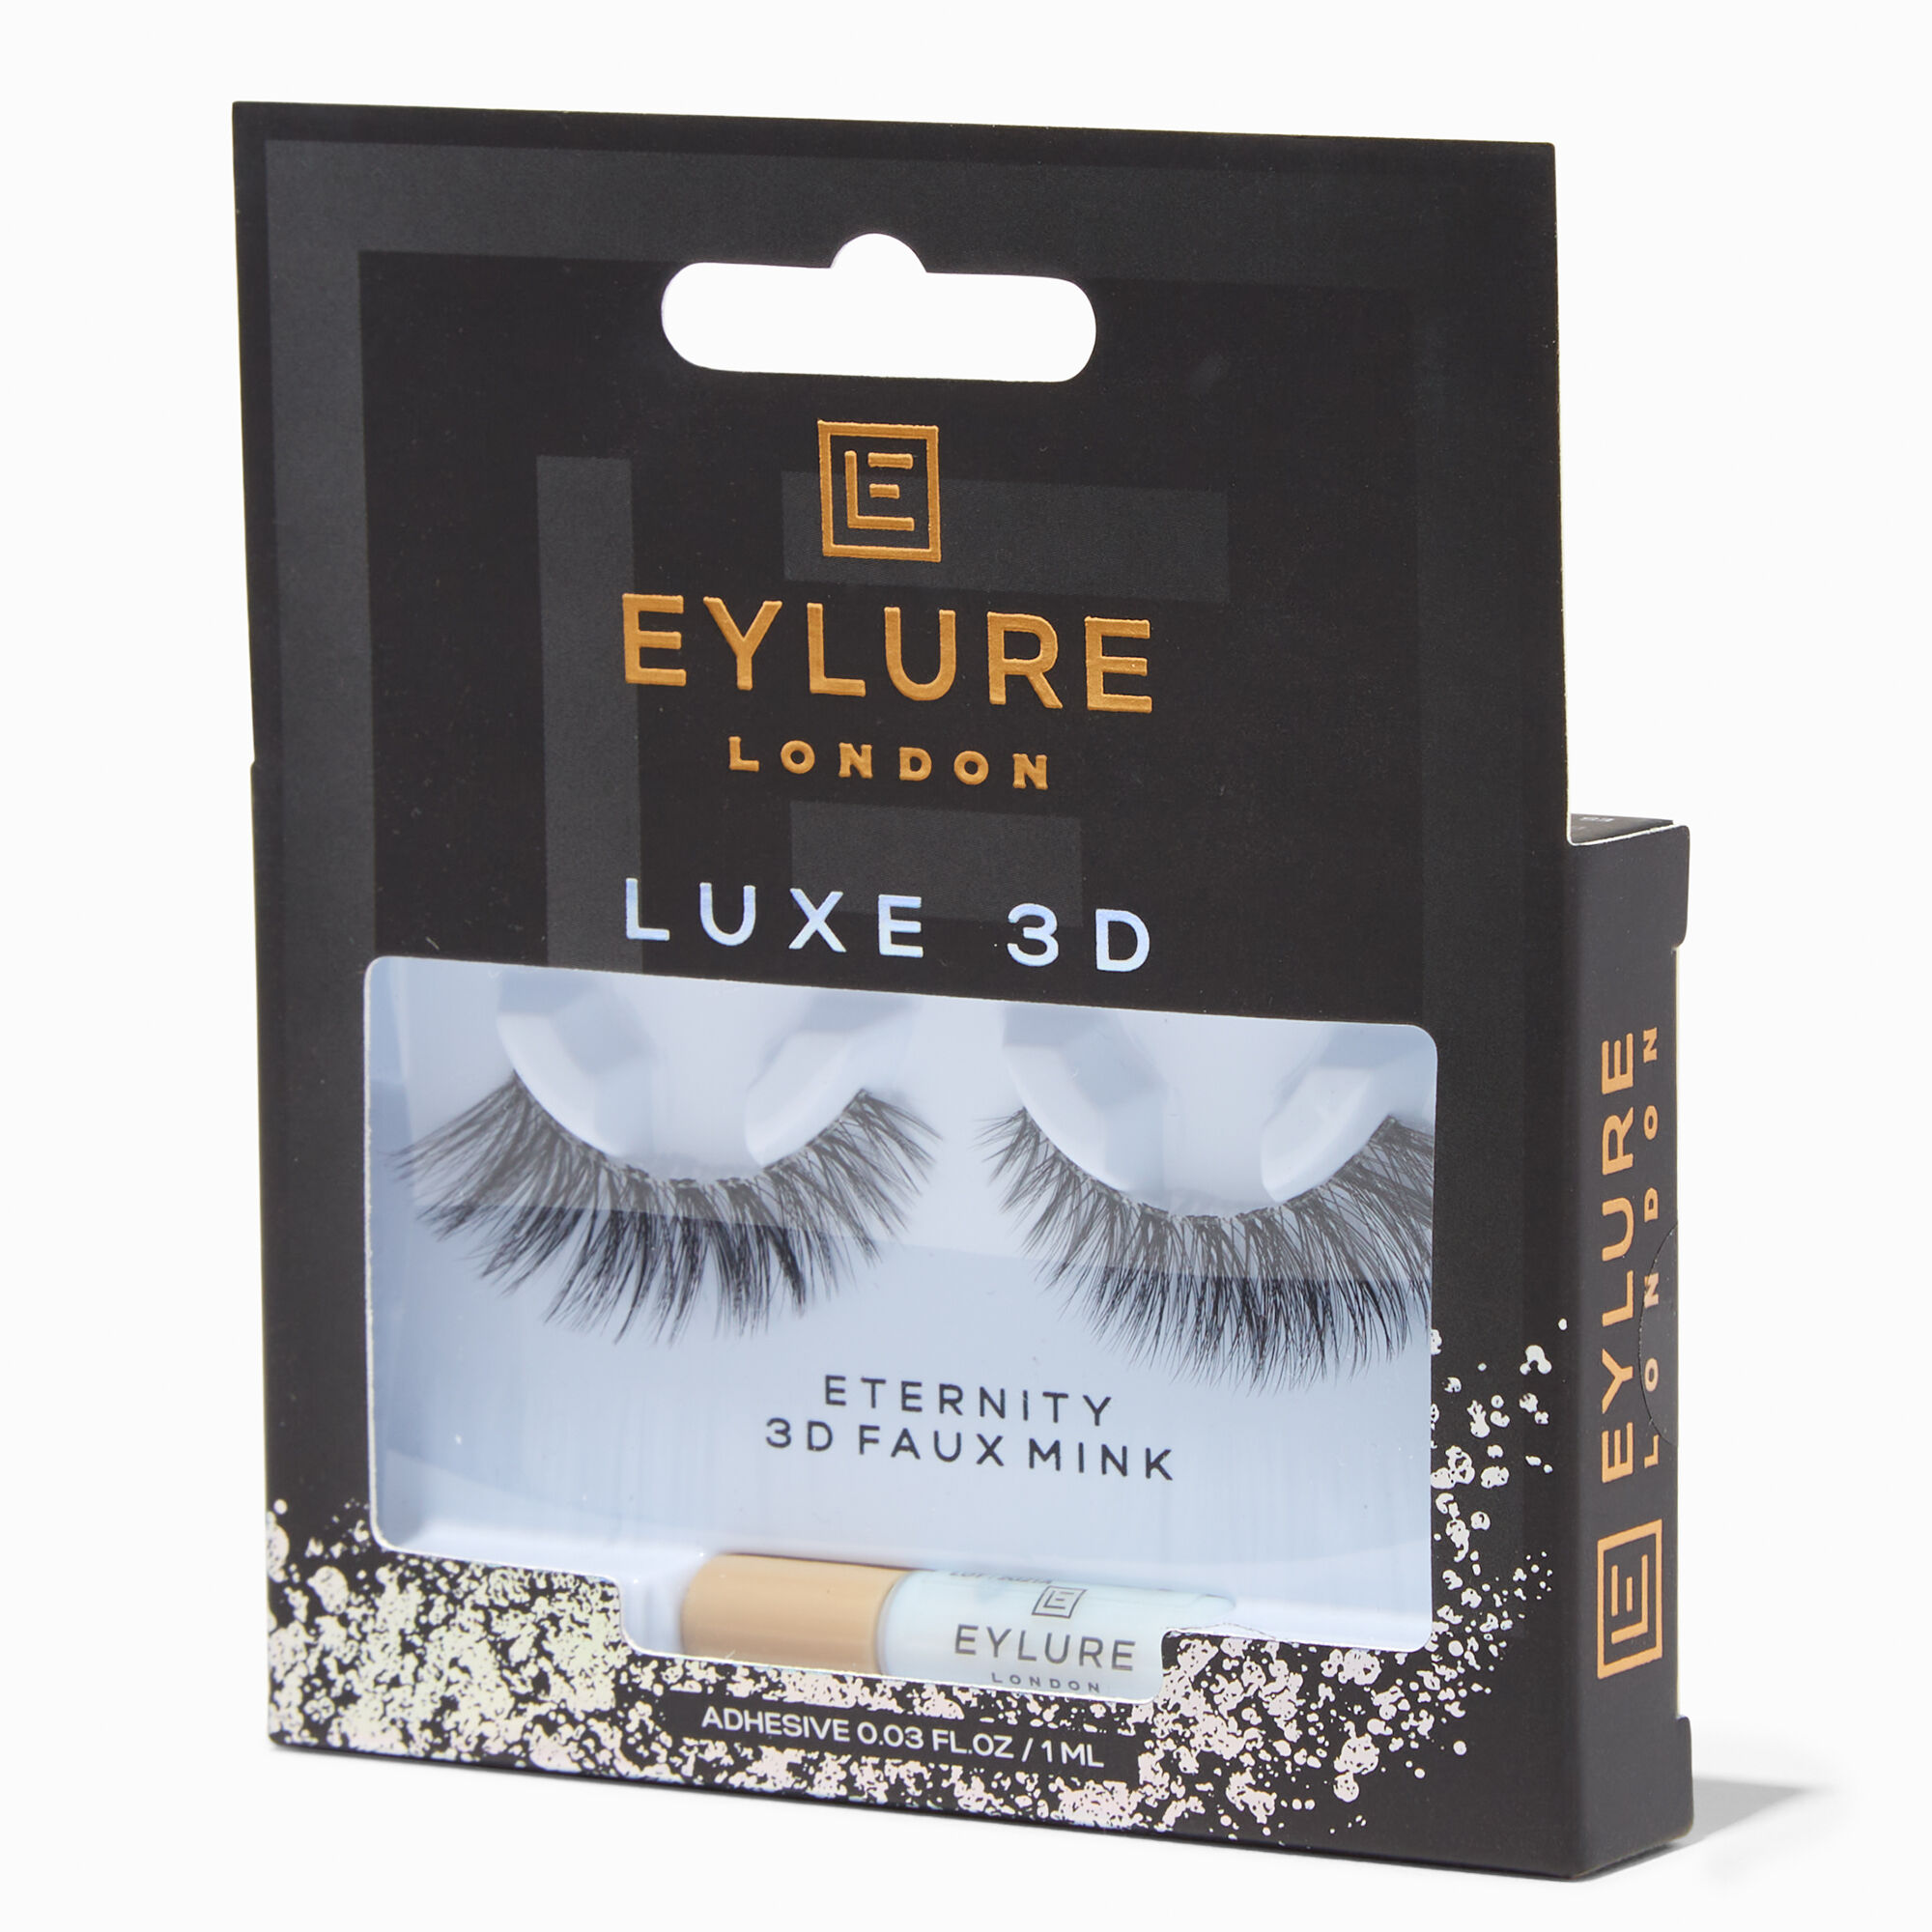 View Claires Eylure Luxe 3D Faux Mink Eyelashes Eternity Black information